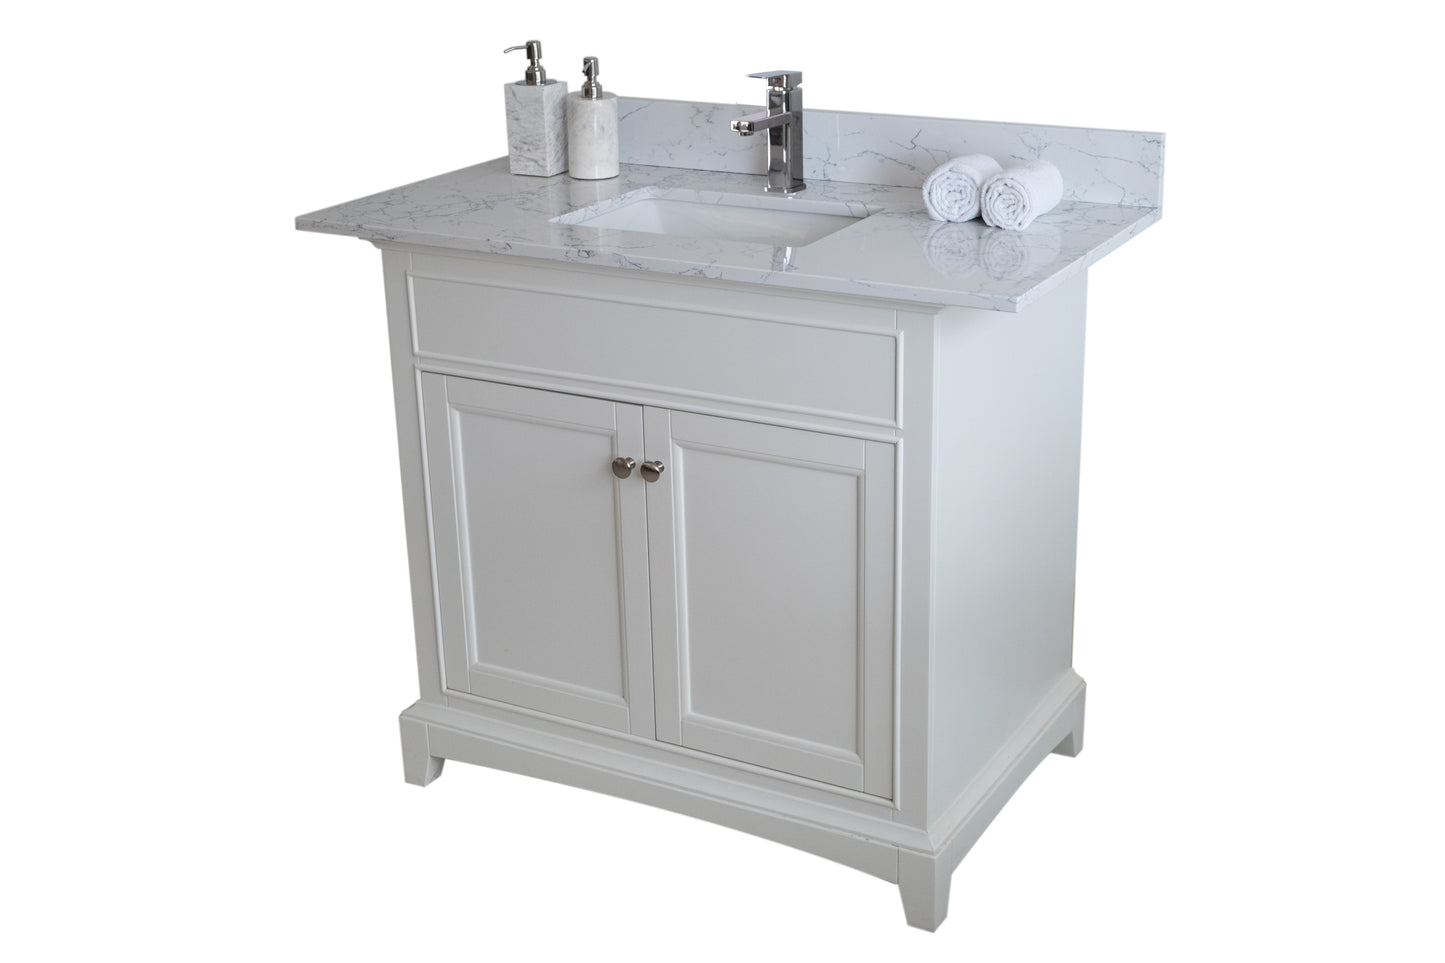 Montary 37"x 22" bathroom stone vanity top carrara jade  engineered marble color with undermount ceramic sink and single faucet hole with backsplash